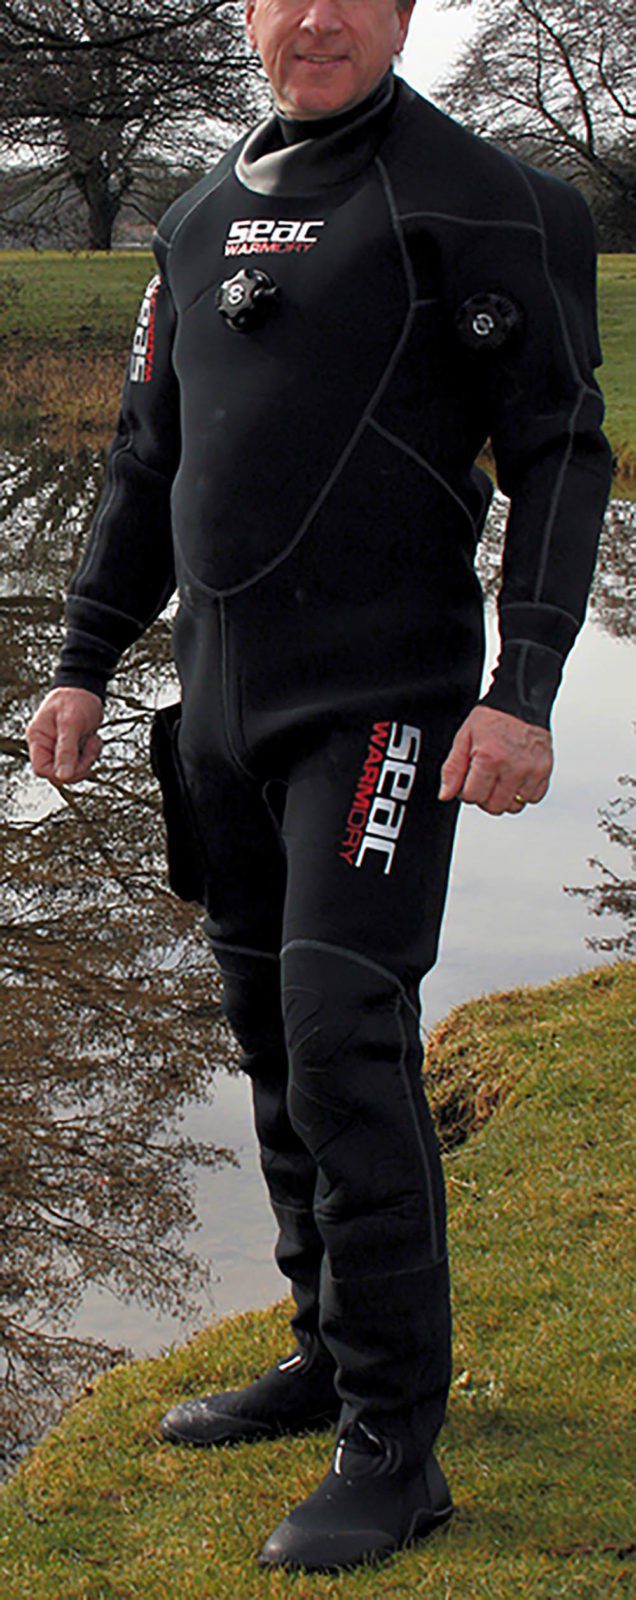 0518 suits seac warmdry suit